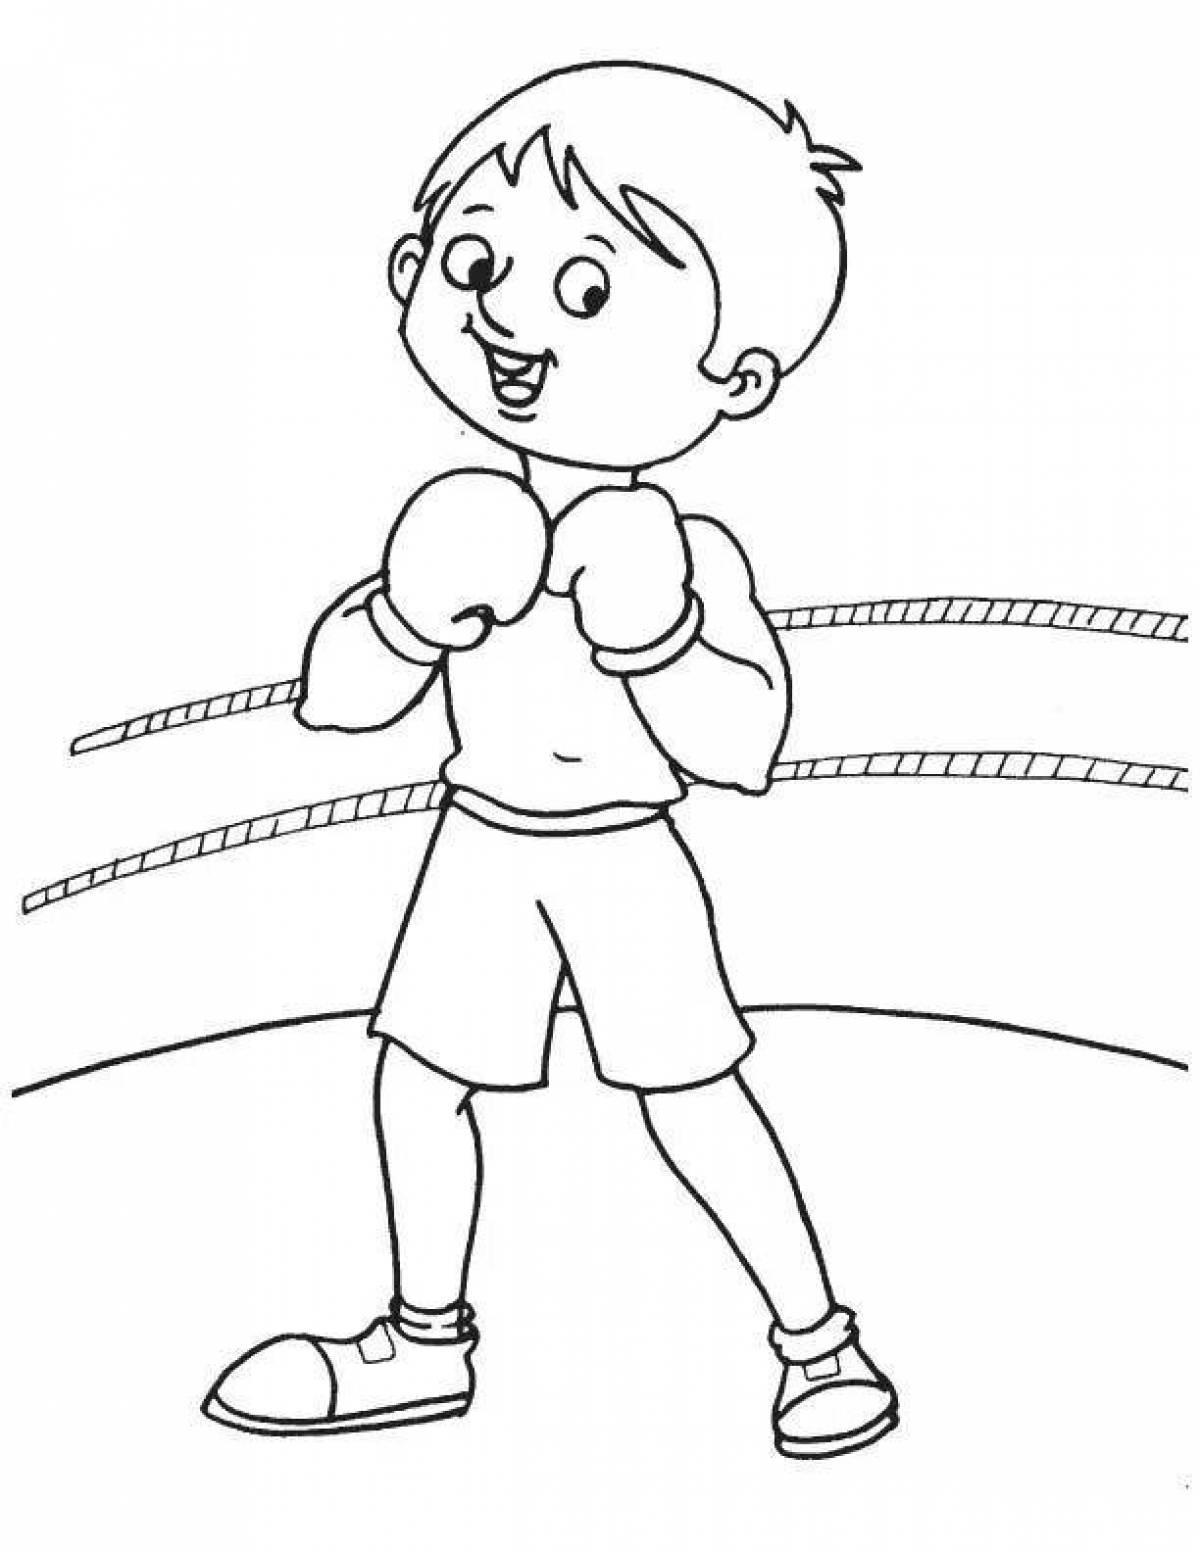 Sport coloring pages athletes